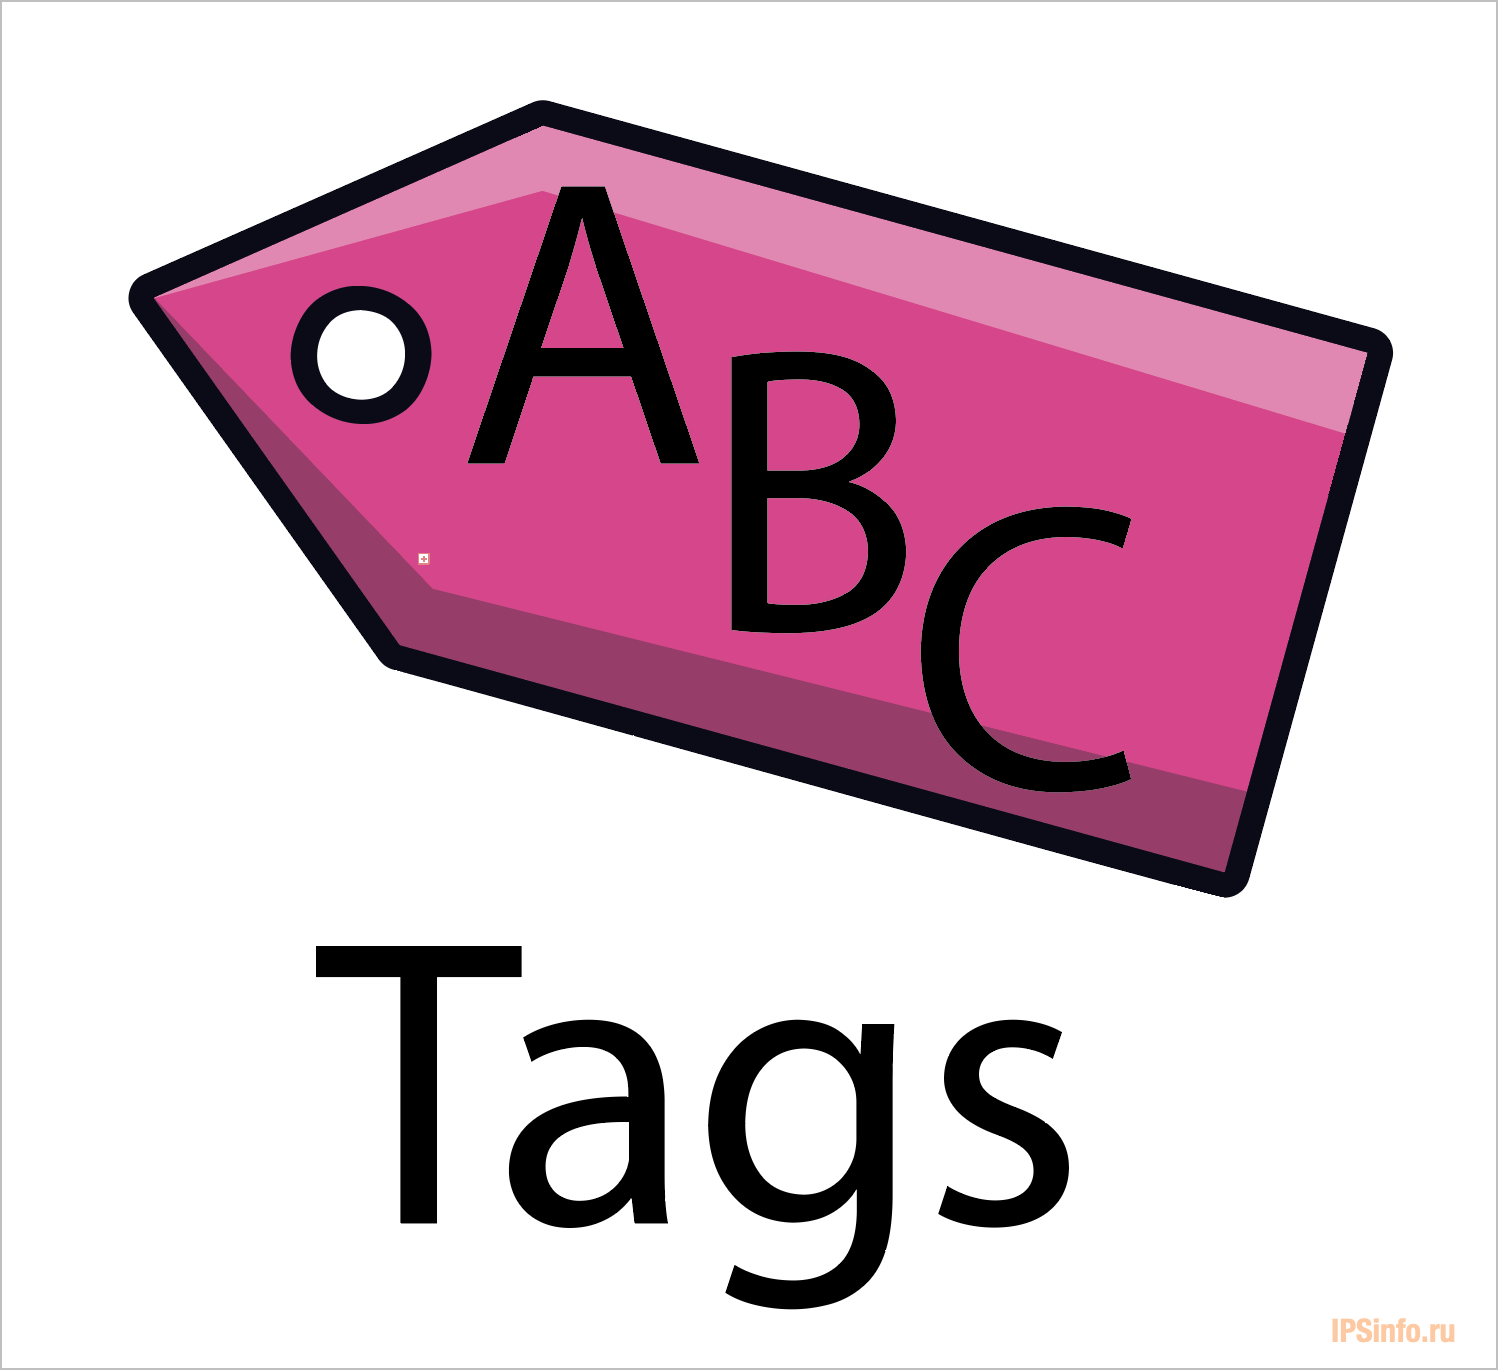 Alphabetical Sorted Tags